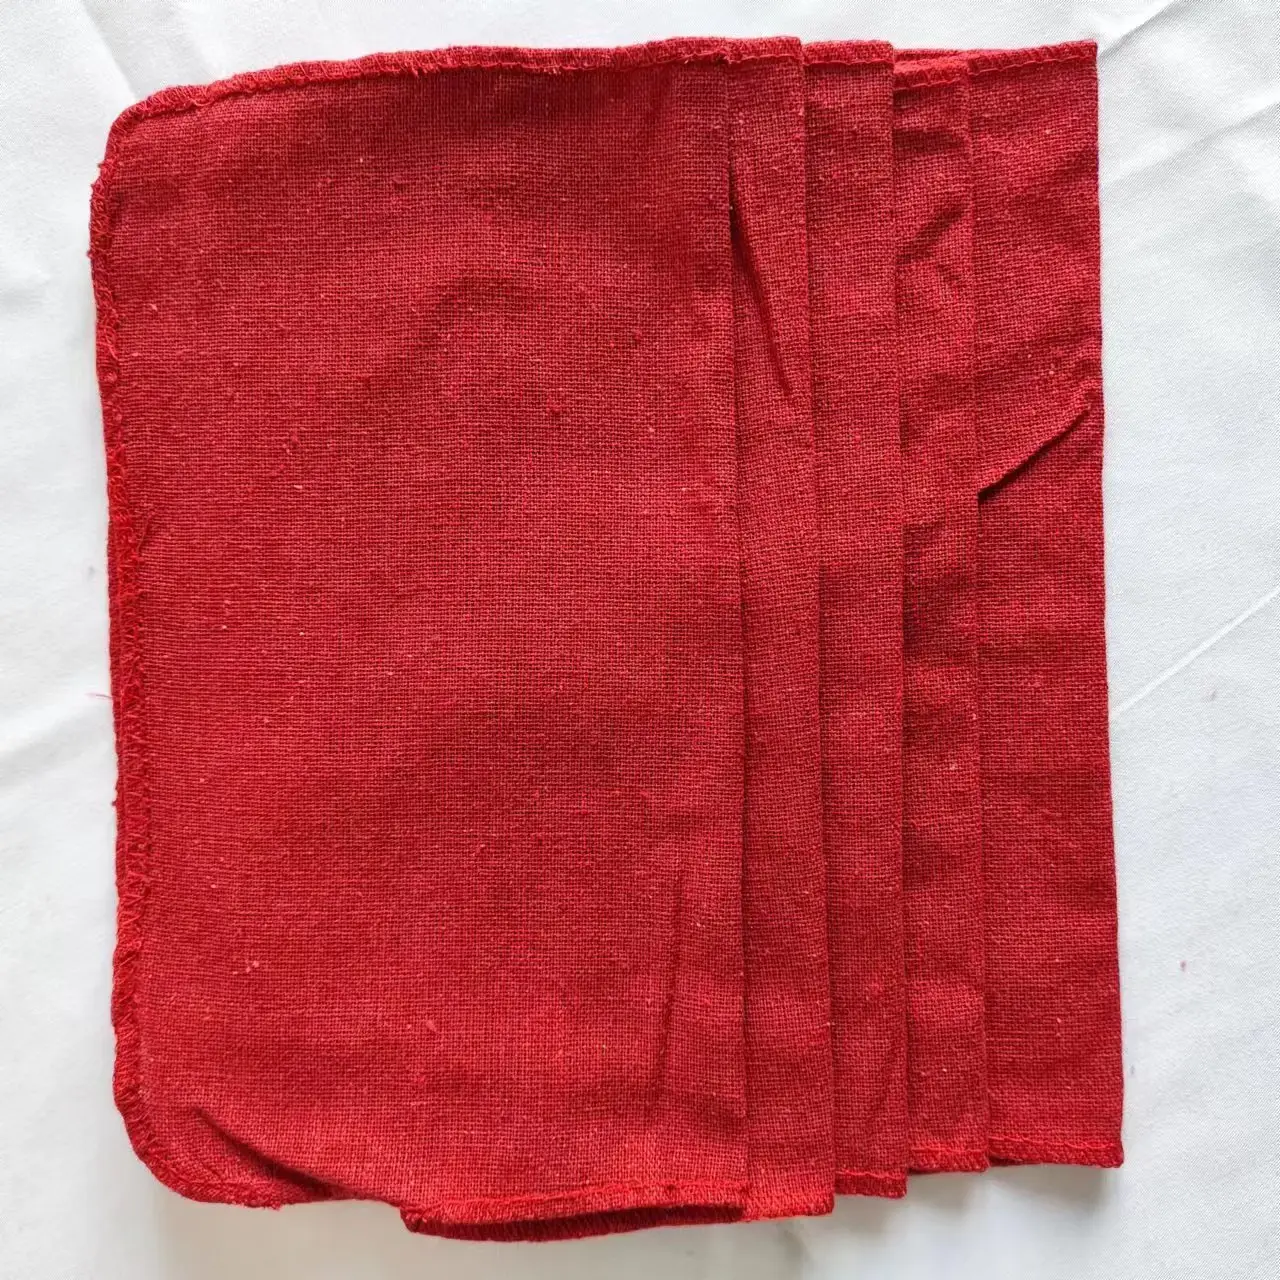 Shop Towels Economy All Purpose towels Reusable Wash Cloths, Dust, Kitchen, Car, Shop Rags for Cleaning (Red)